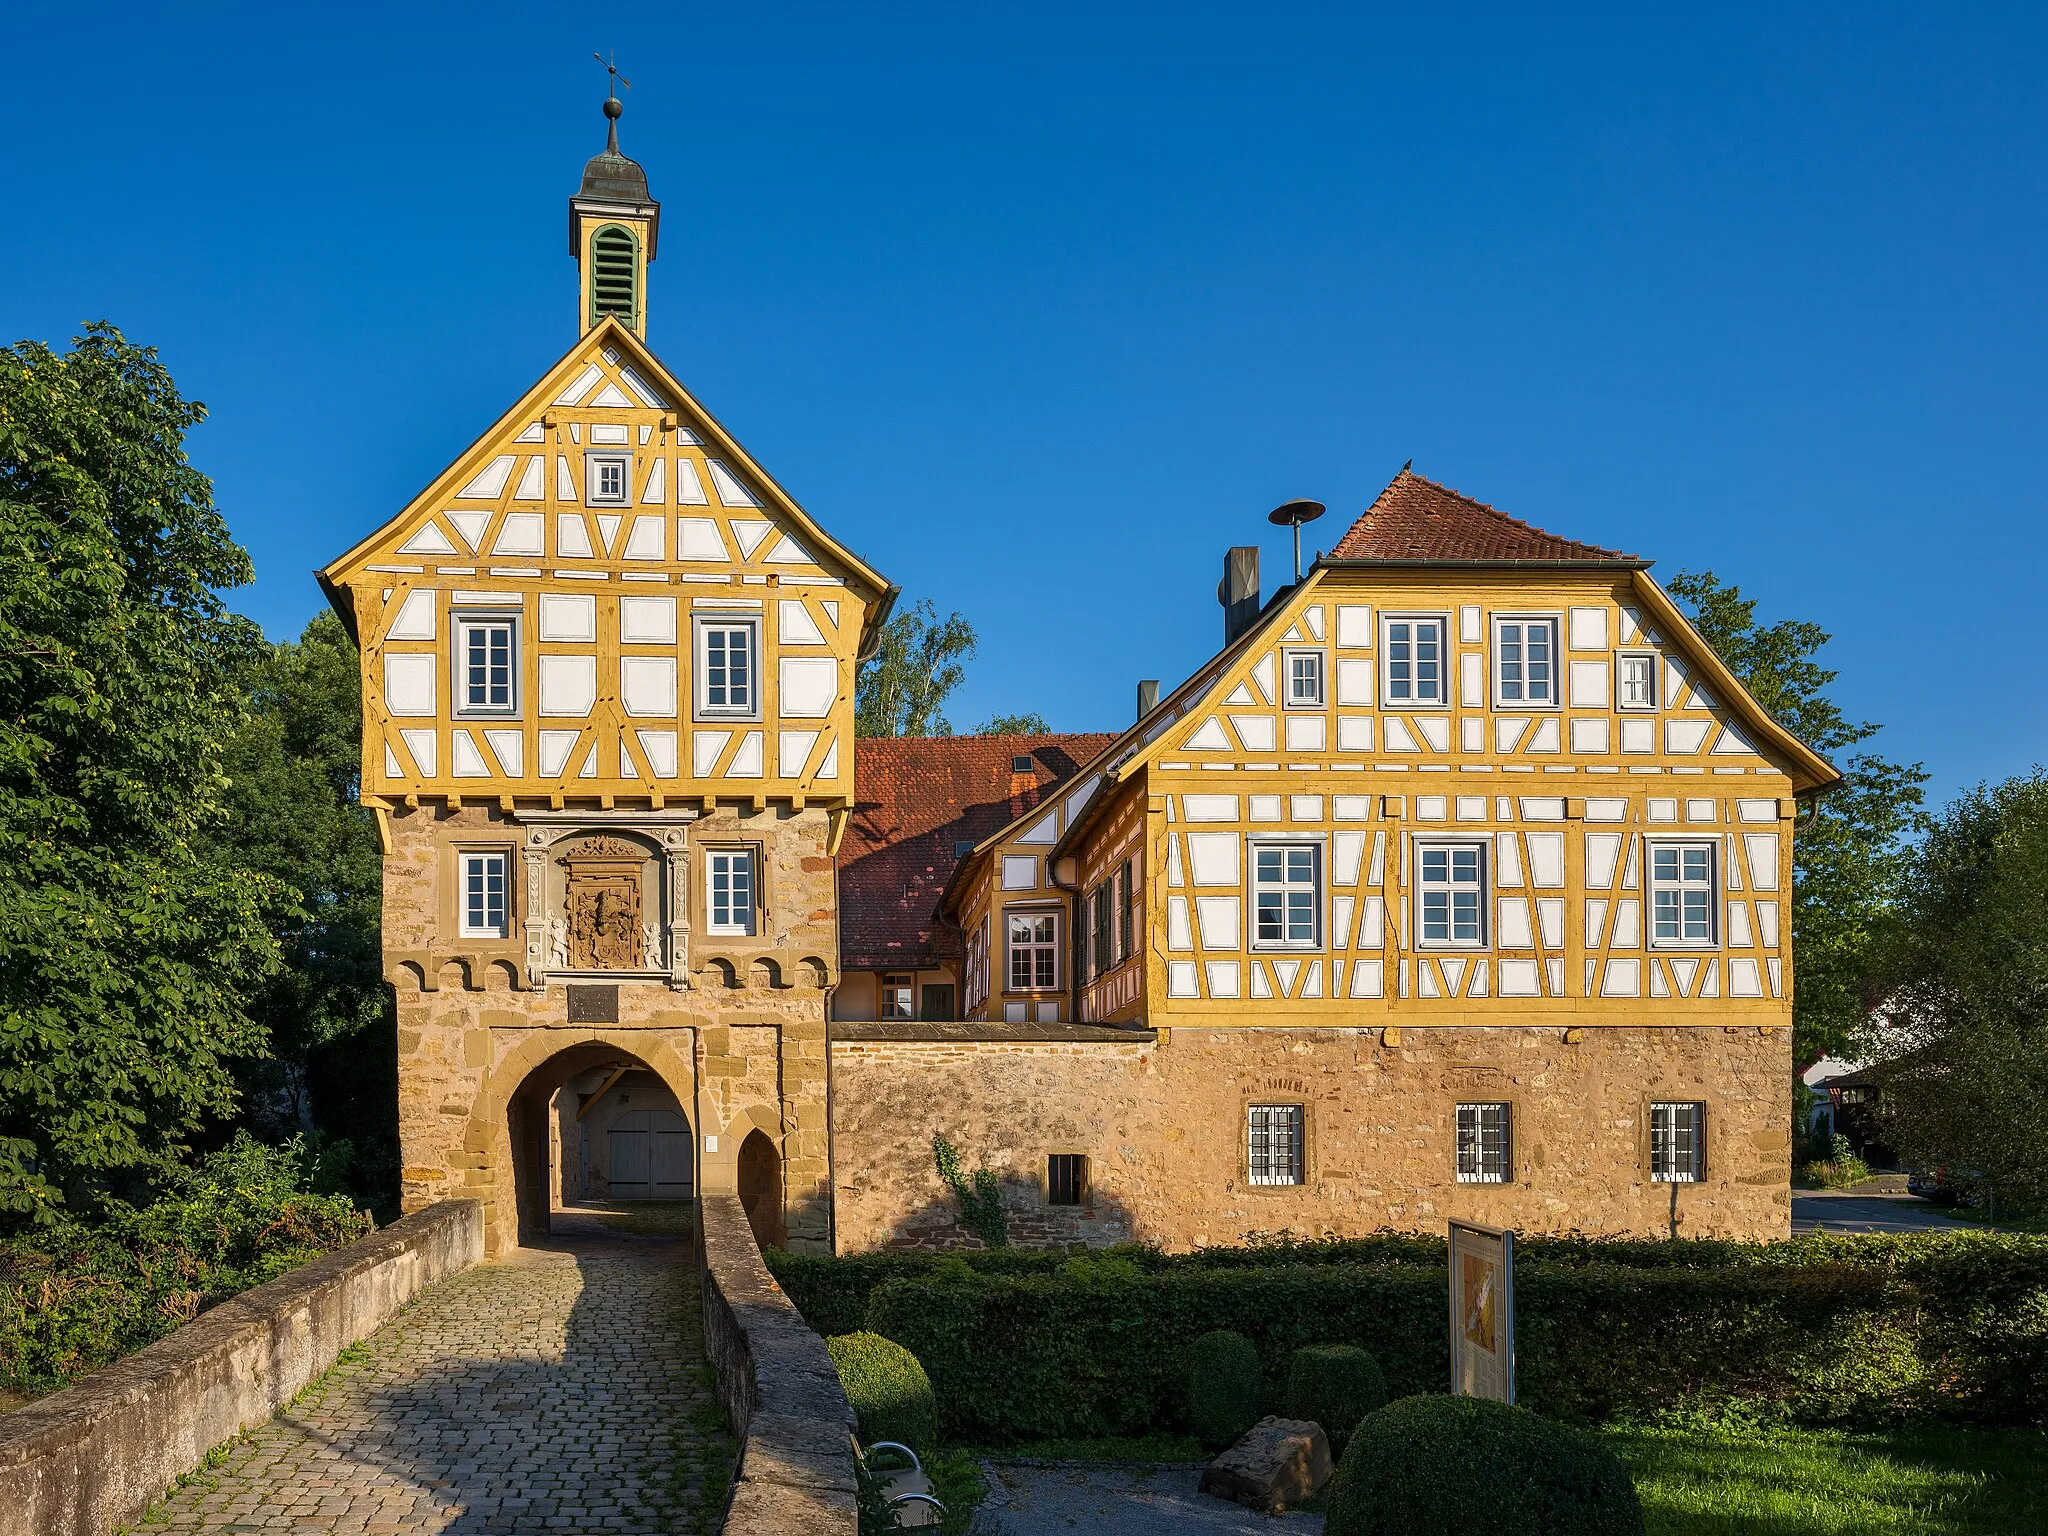 Photo showing: Steinheim an der Murr, Germany, district Höpfigheim: the so-called Schlössle (“little castle”), built in the middle ages as a moated castle and altered in the 16th century to a timber-framed manor house. View from 
the drive which has been built at the place of the former drawbridge. So you can imagine in the foreground the moat which has been filled. The vivid colours of the photo are due to the warm evening light.